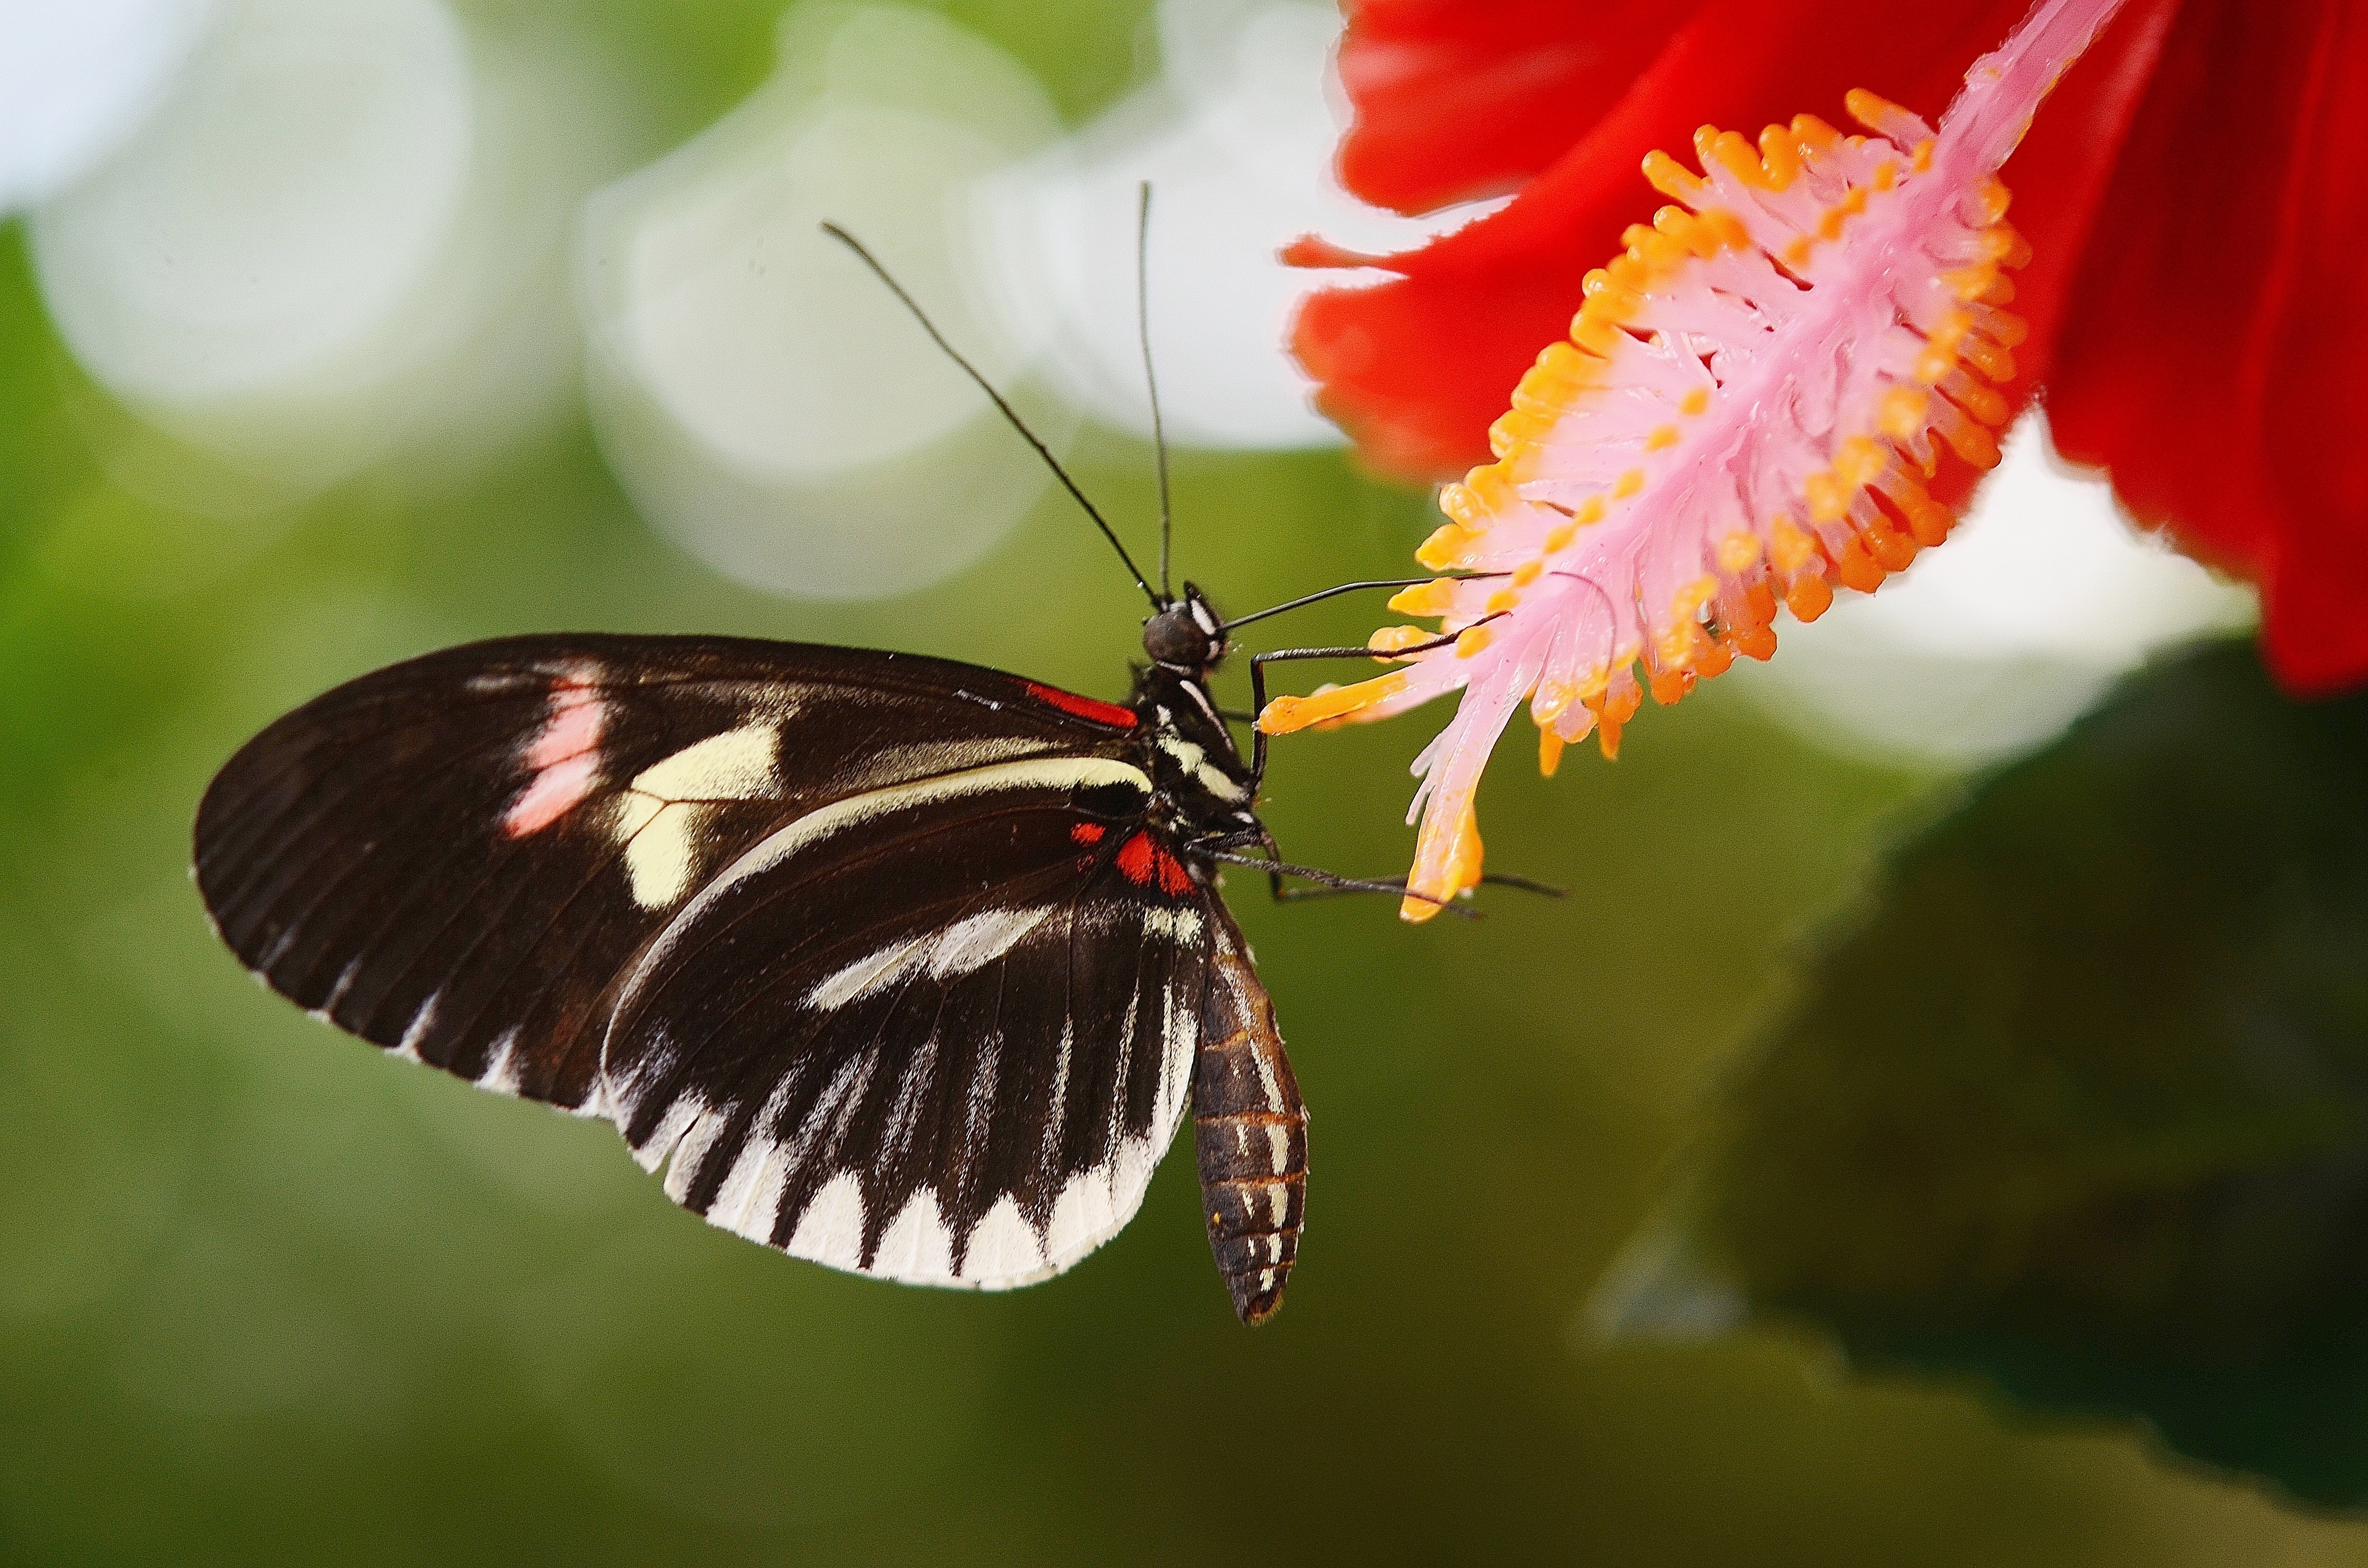 Black and white butterfly on red petal flower photo